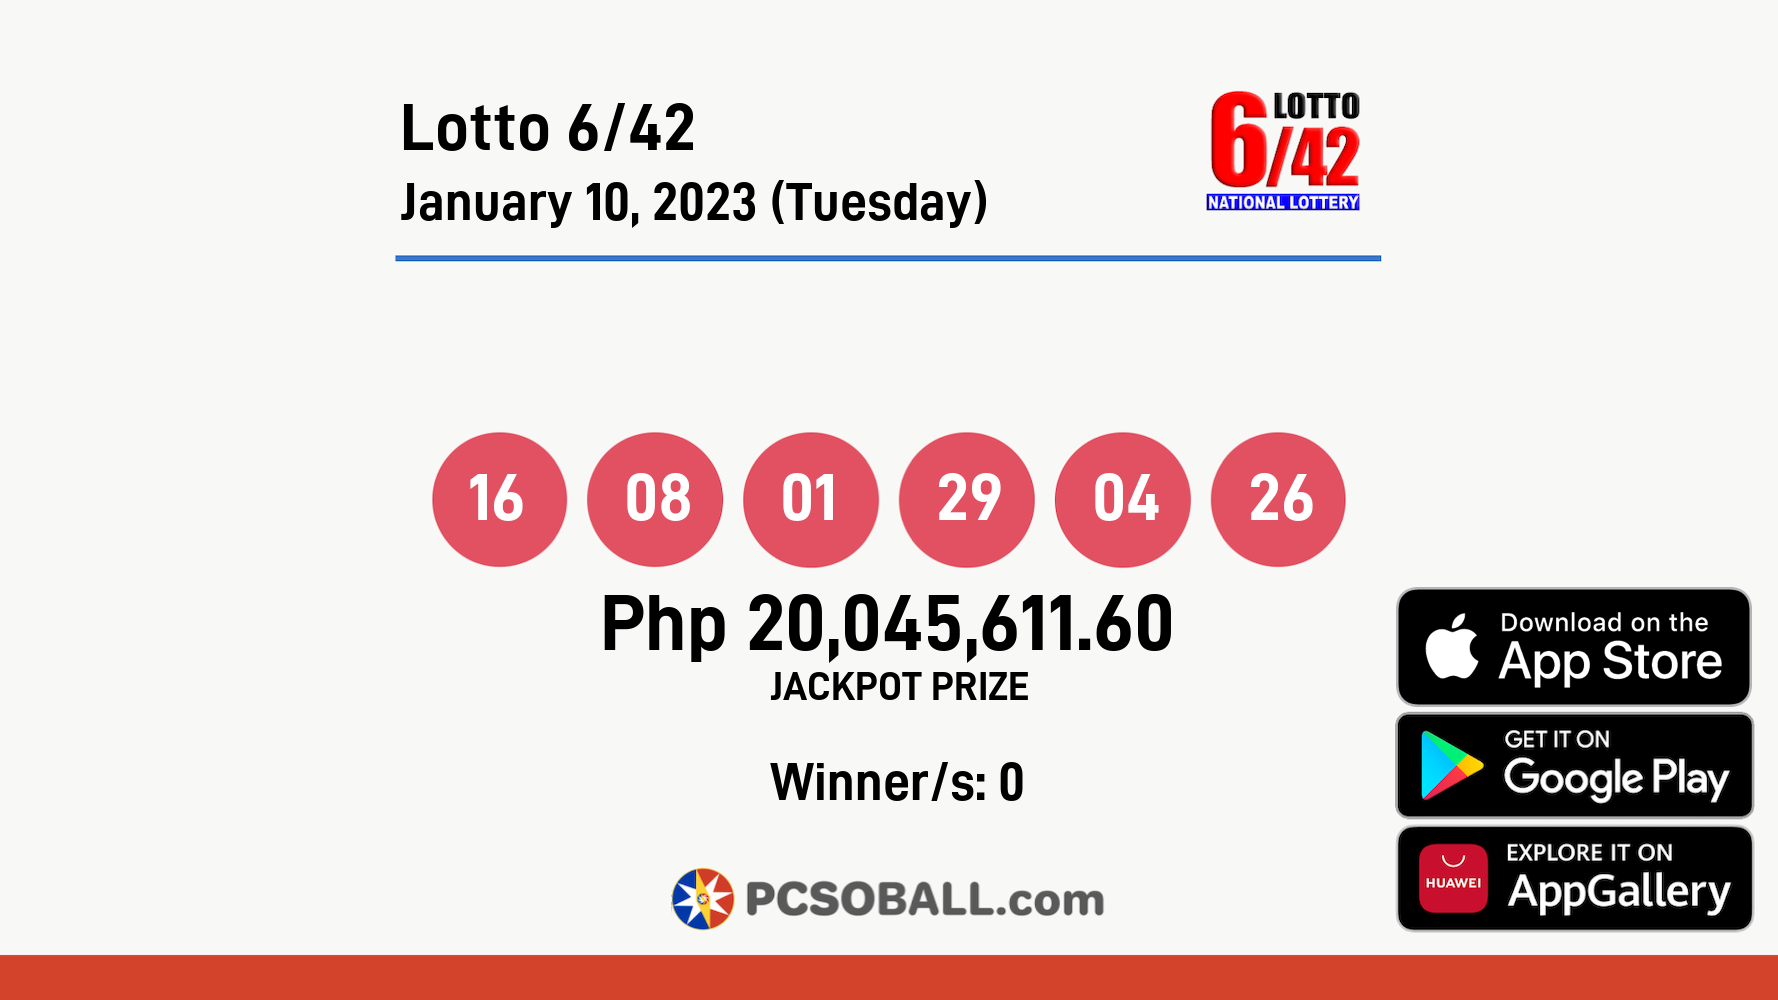 Lotto 6/42 January 10, 2023 (Tuesday) Result